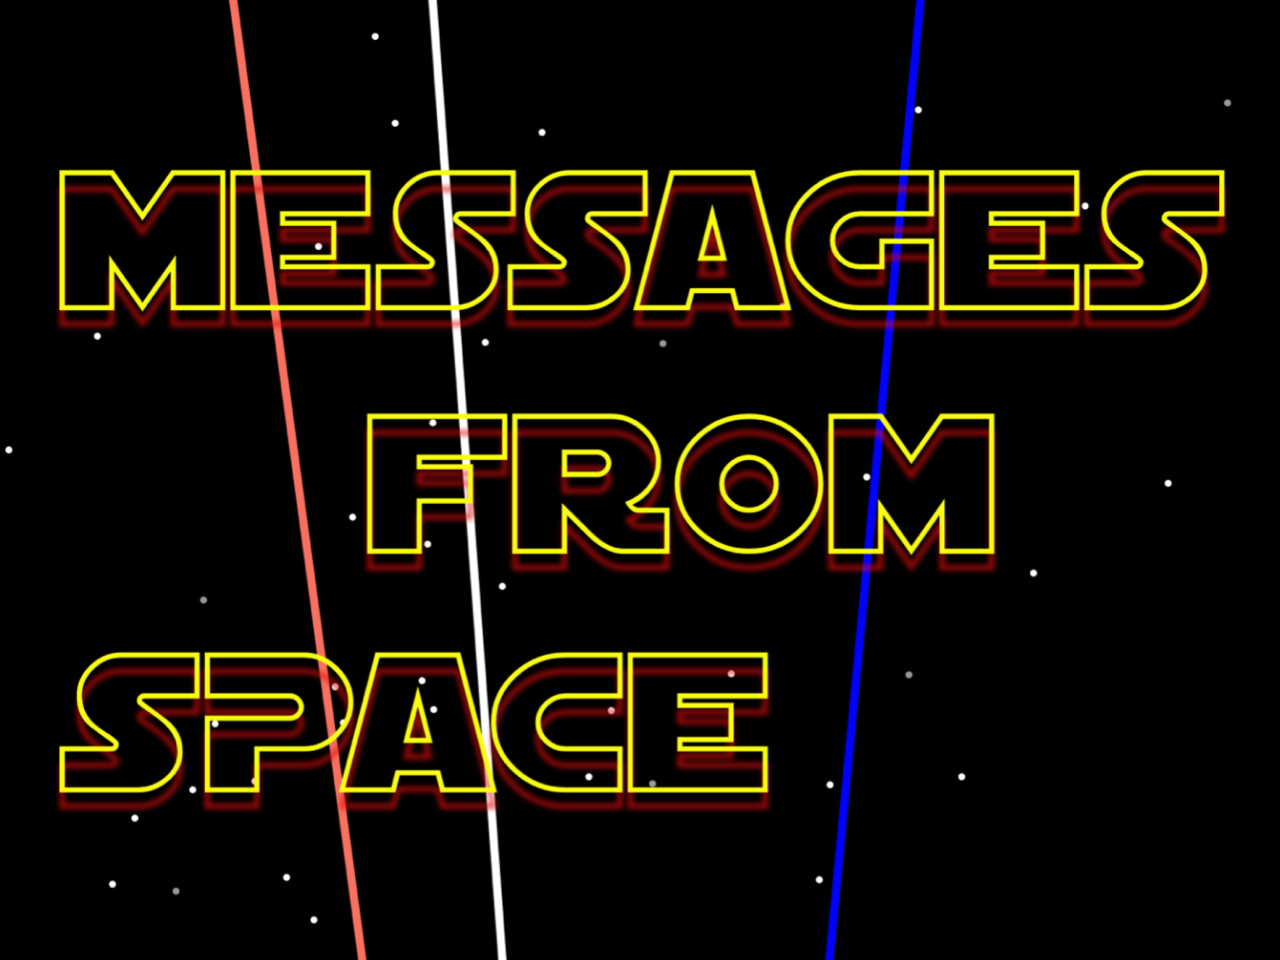 Thumbnail for the project Messages From Space